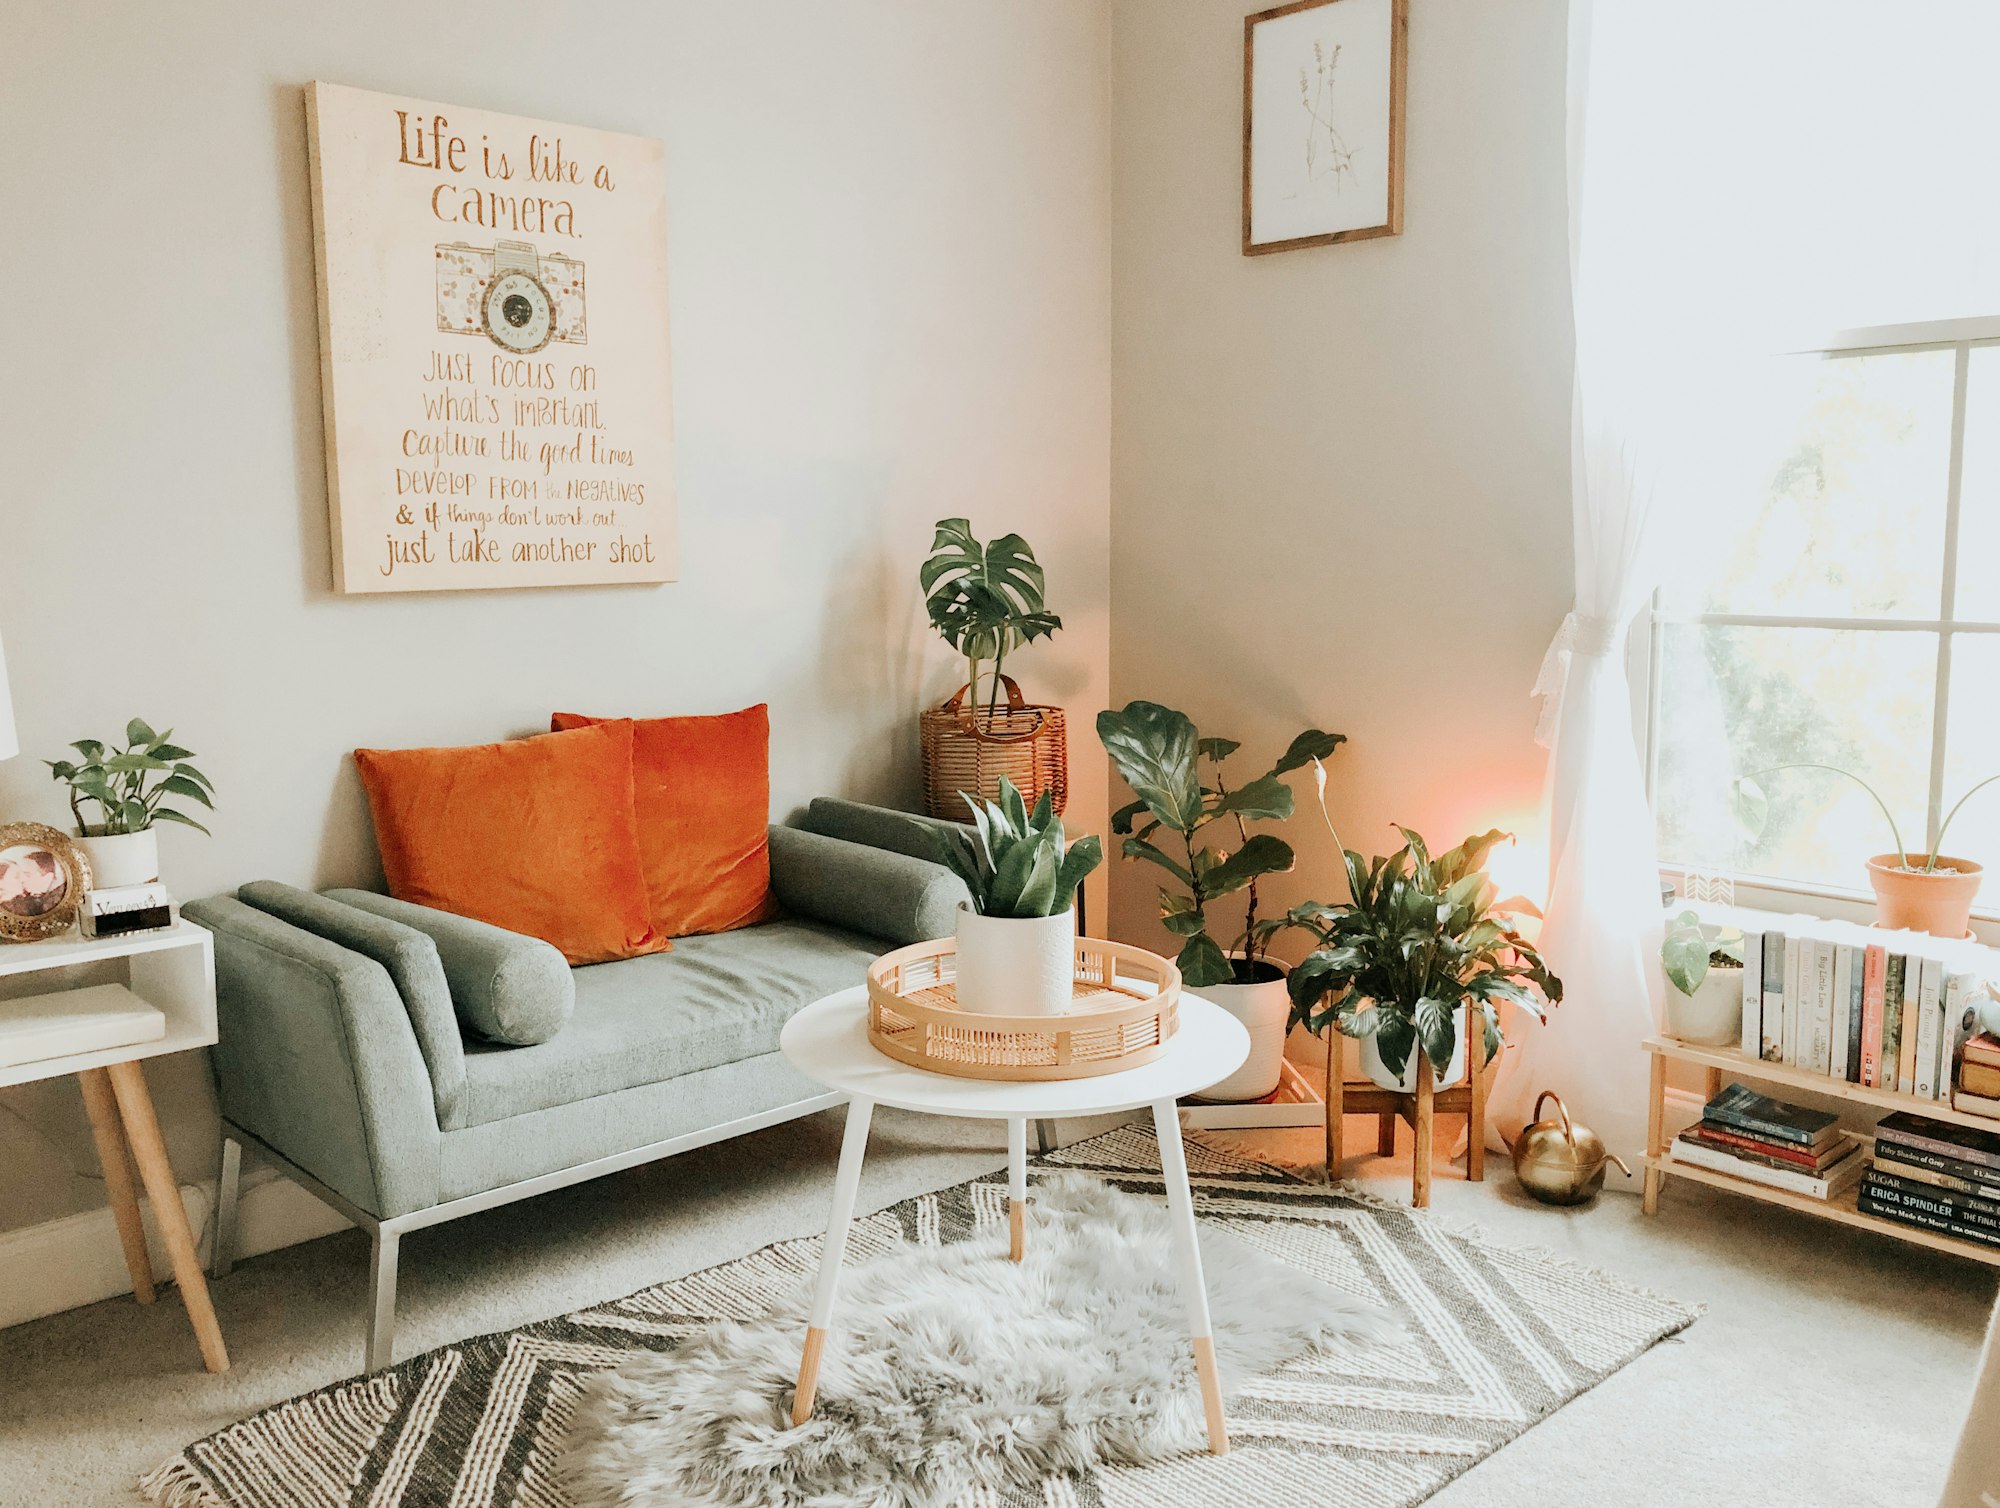 Ways to visually warm up the apartment